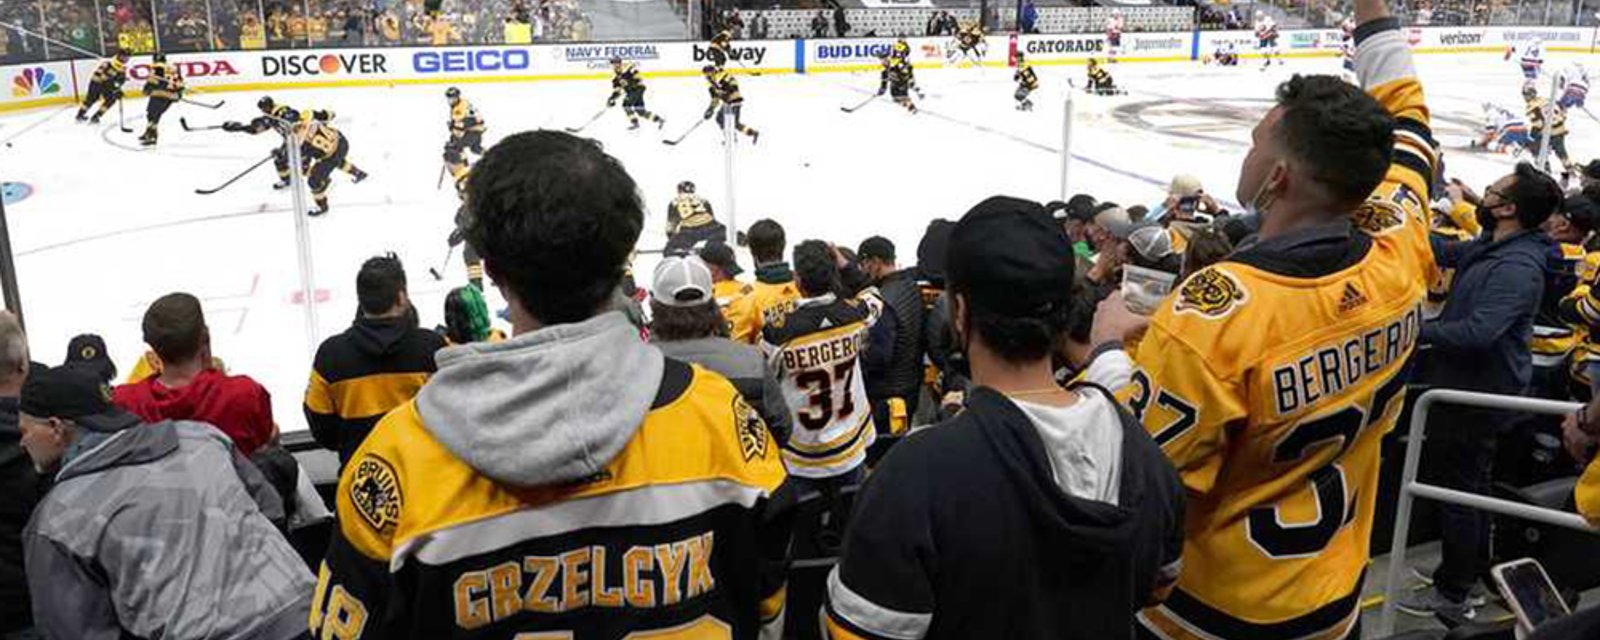 TD Garden announces new fan safety protocols to attend home games 